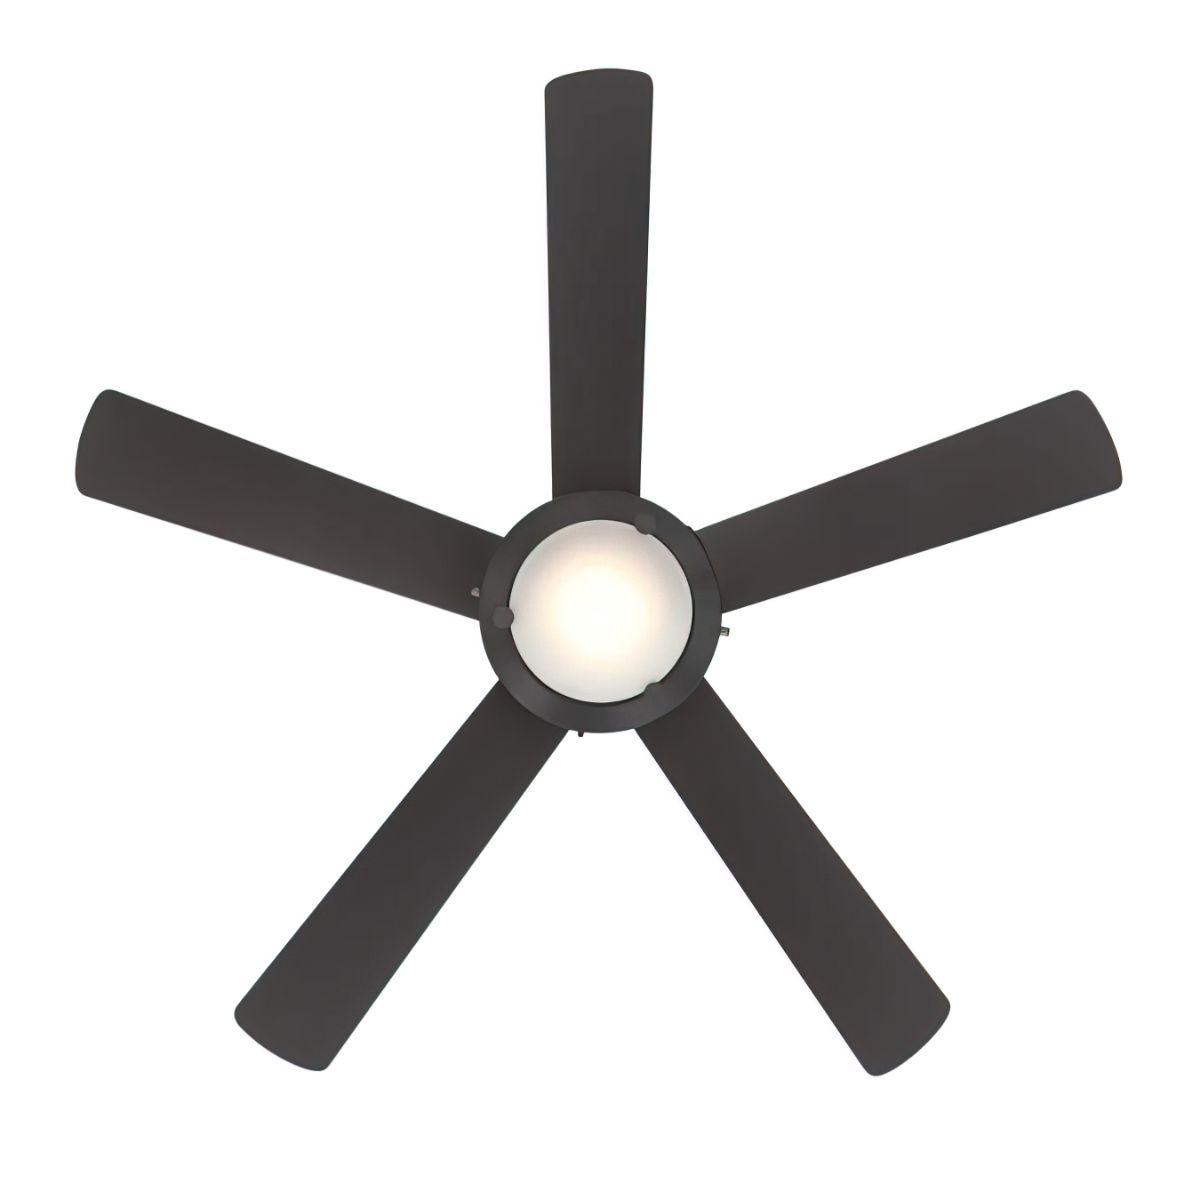 Comet 52 Inch Espresso Modern Ceiling Fan With Light, Reversible Blades